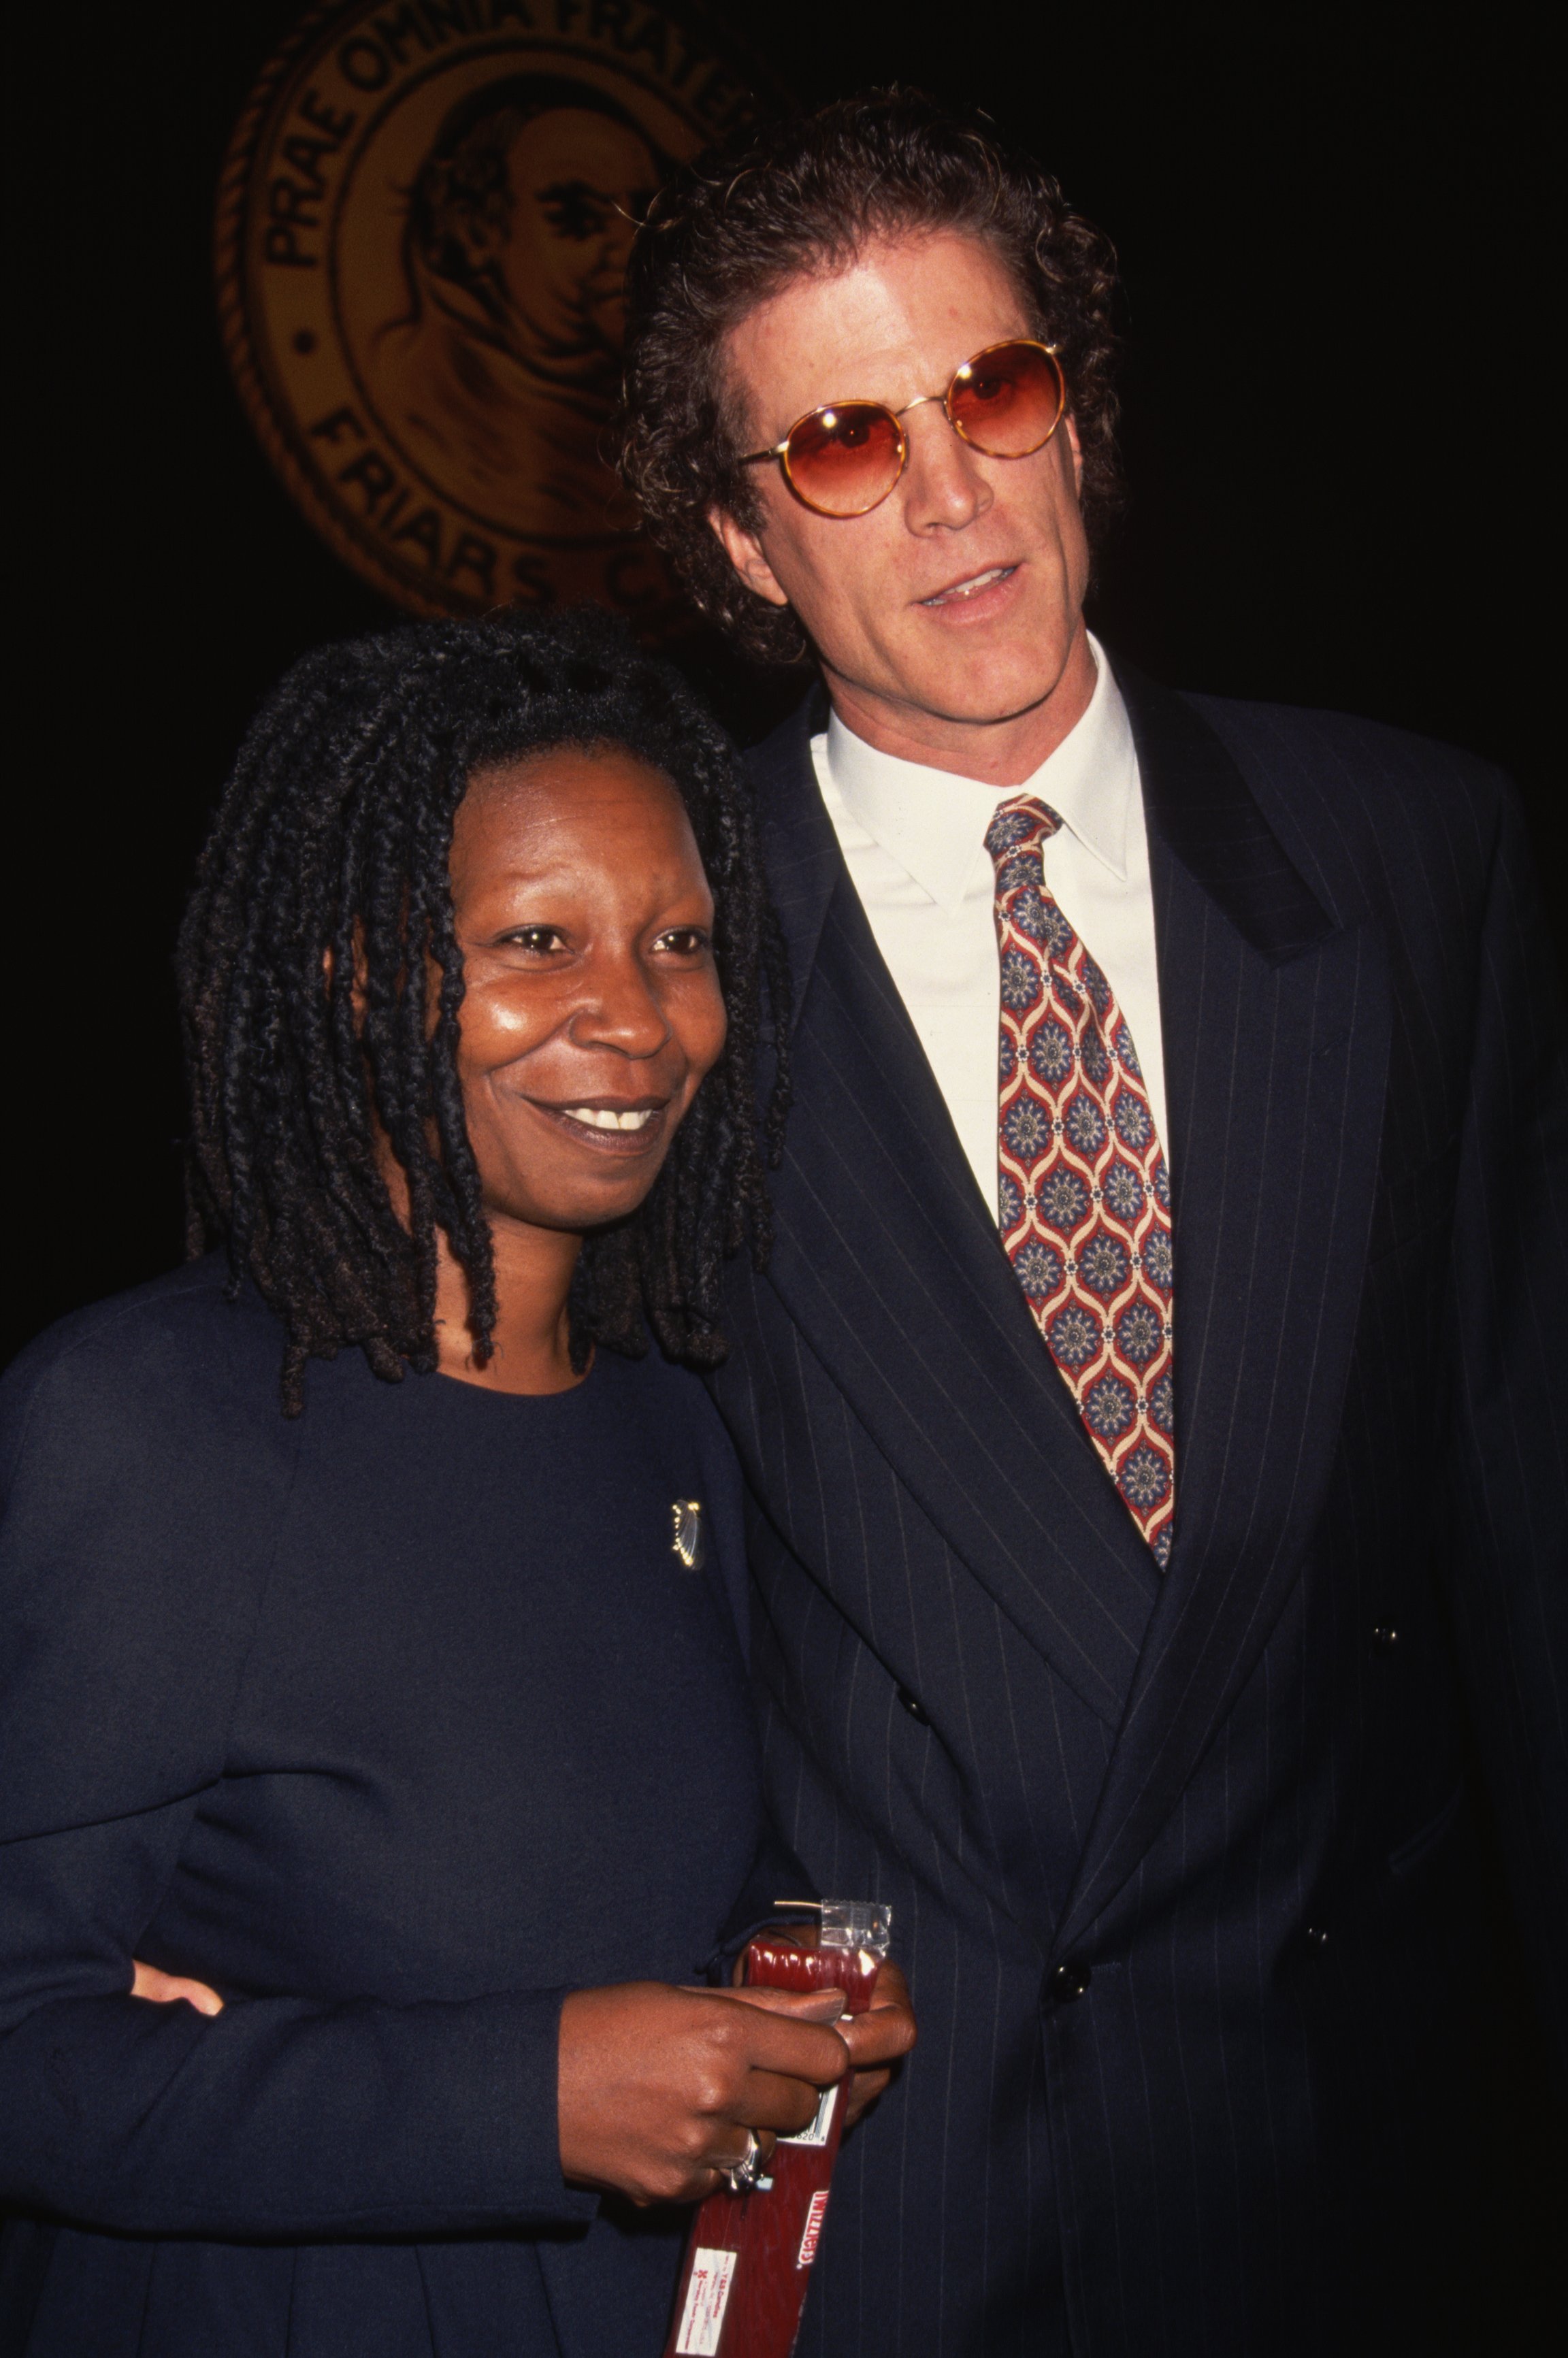 Whoopi Goldberg stands with boyfriend Ted Danson at the New York Friars Club in 1993 | Source: Getty Images